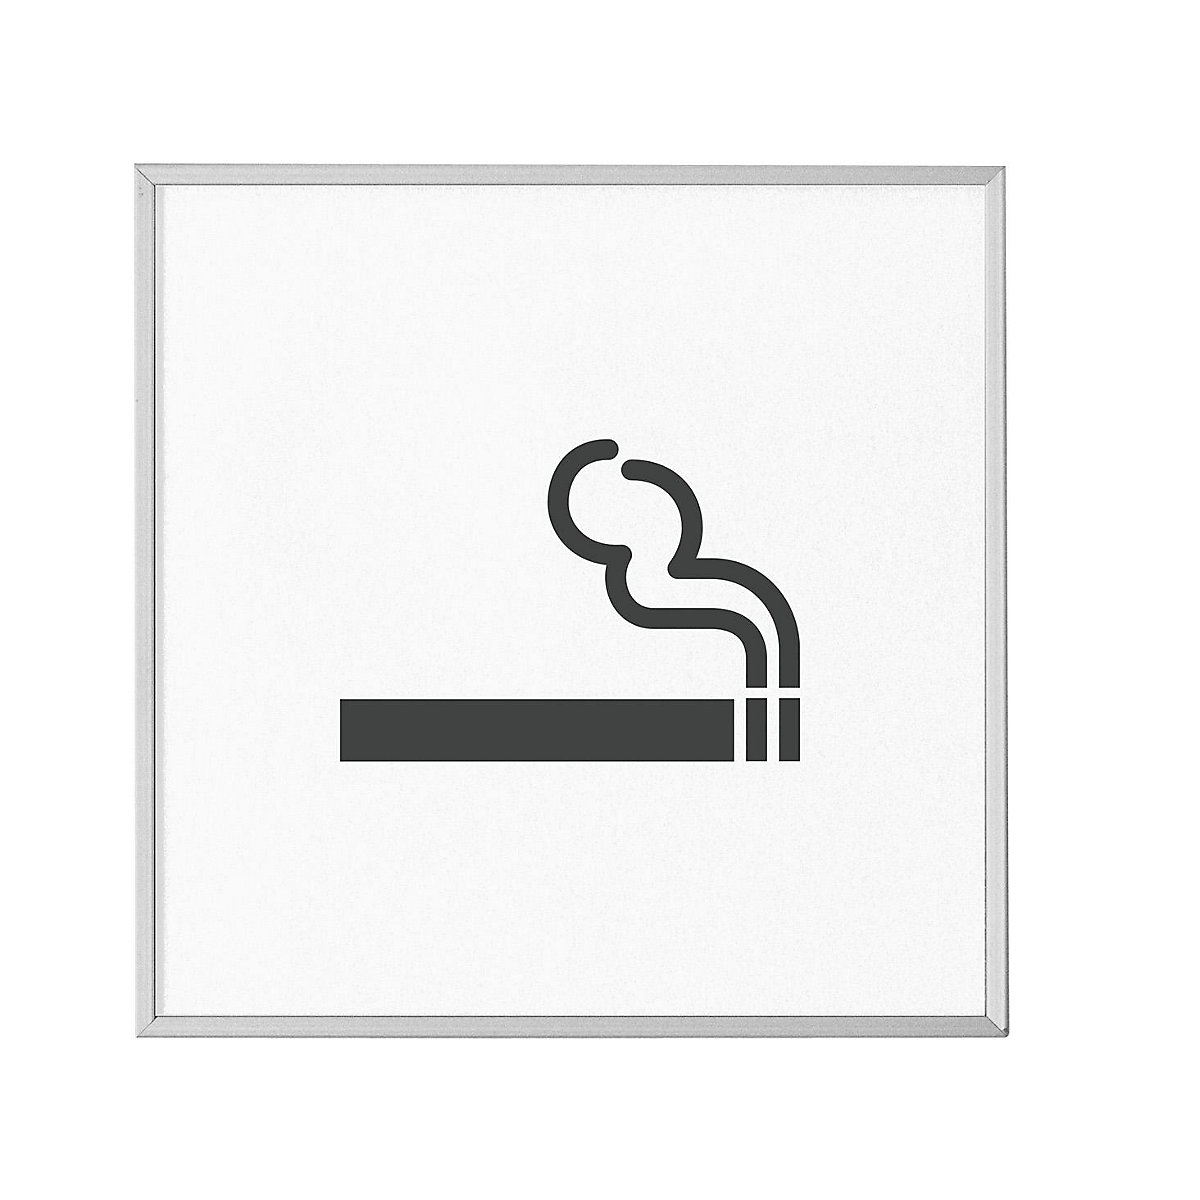 MADRID Silver Line™ door sign, pictogram HxW 120 x 120 mm, smoking permitted-2